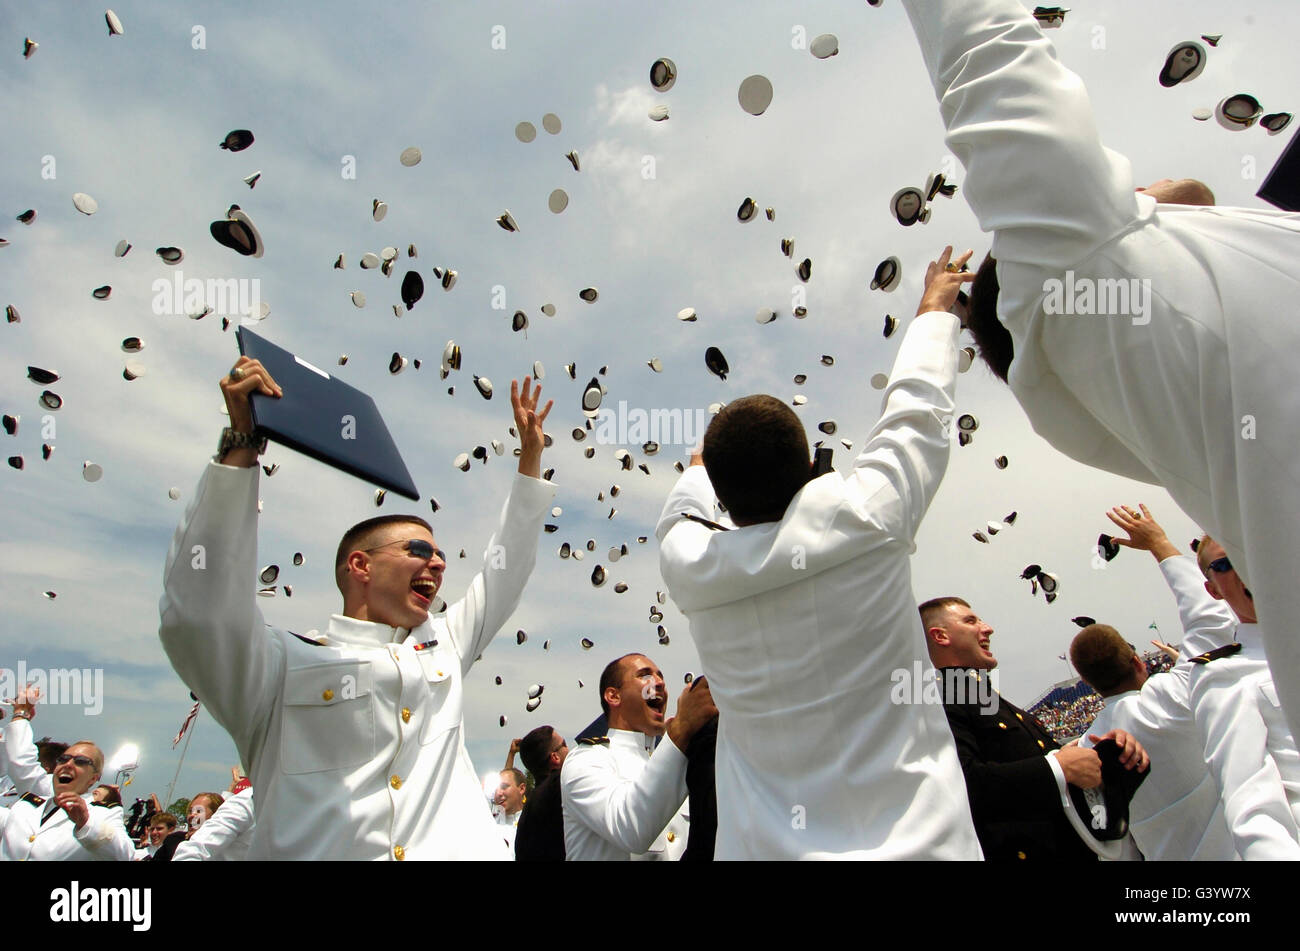 Newly commissioned U.S. Naval Officers celebrate by throwing their hats in the air. Stock Photo